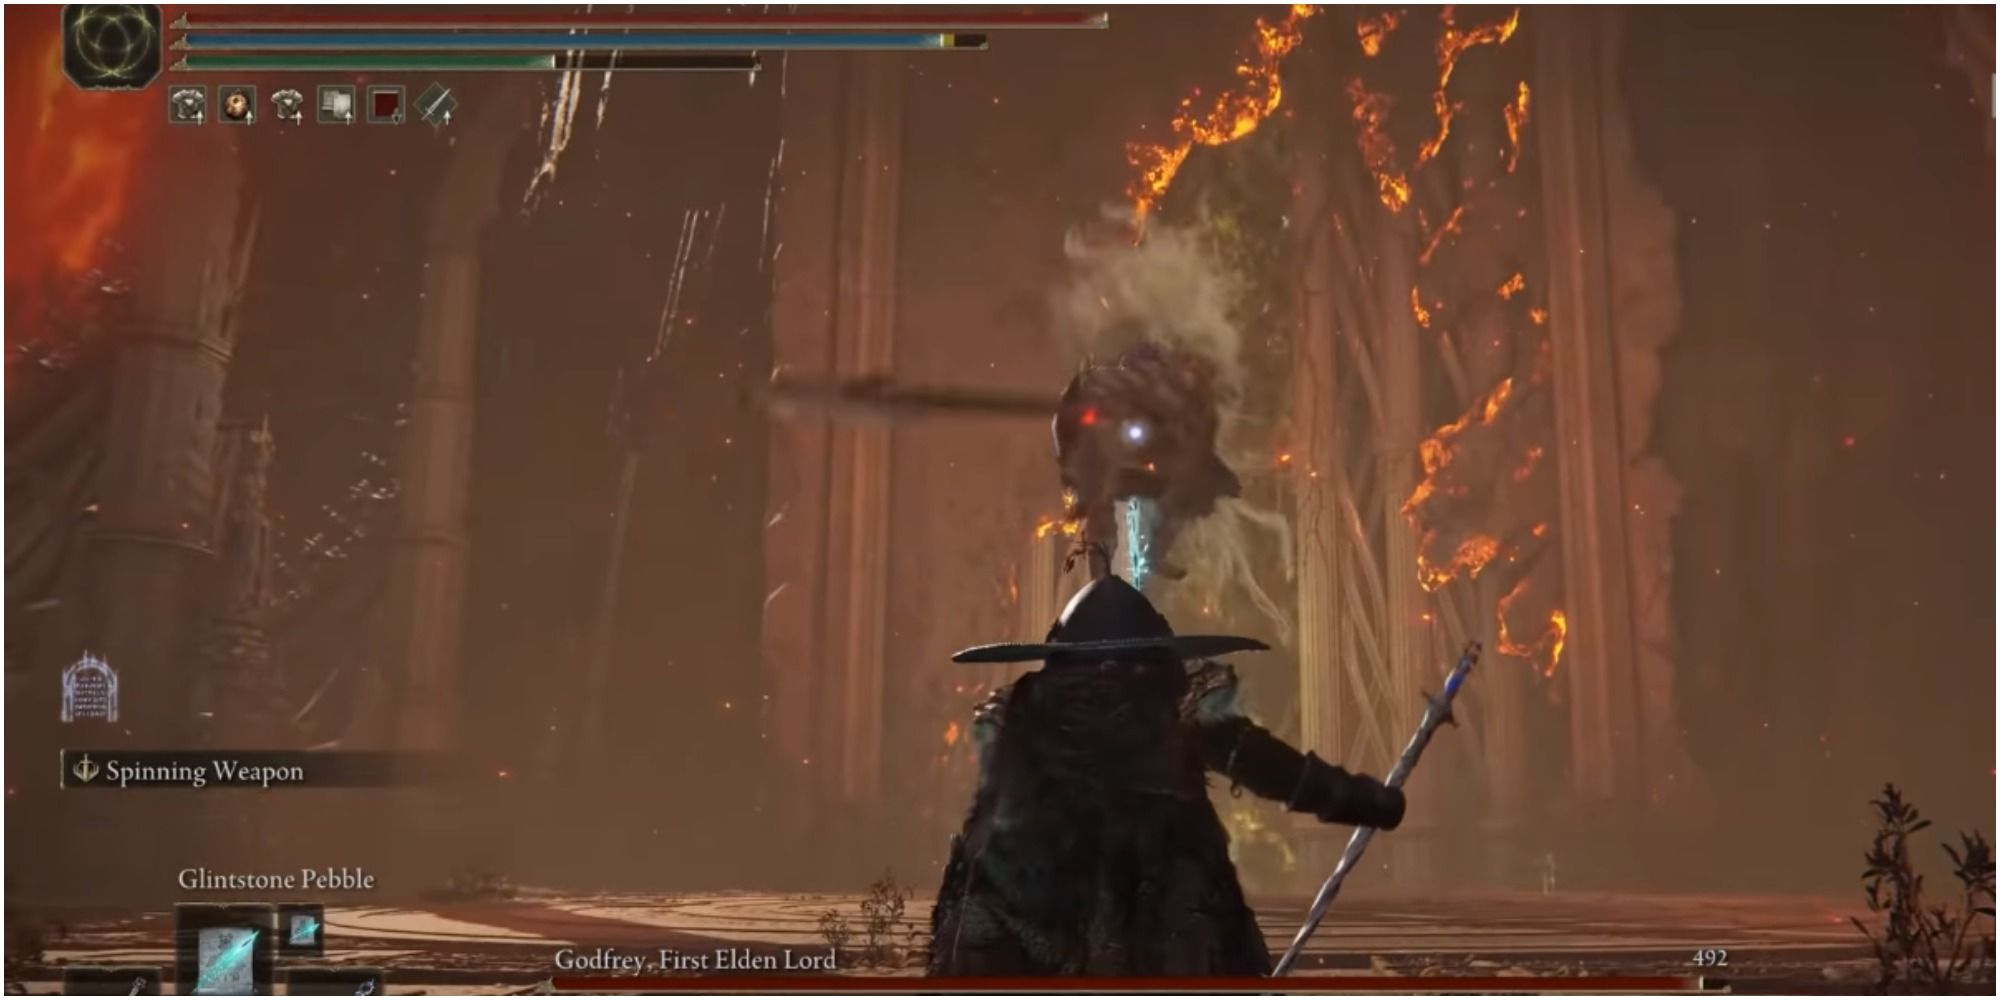 Godfrey throwing an Axe on the player.